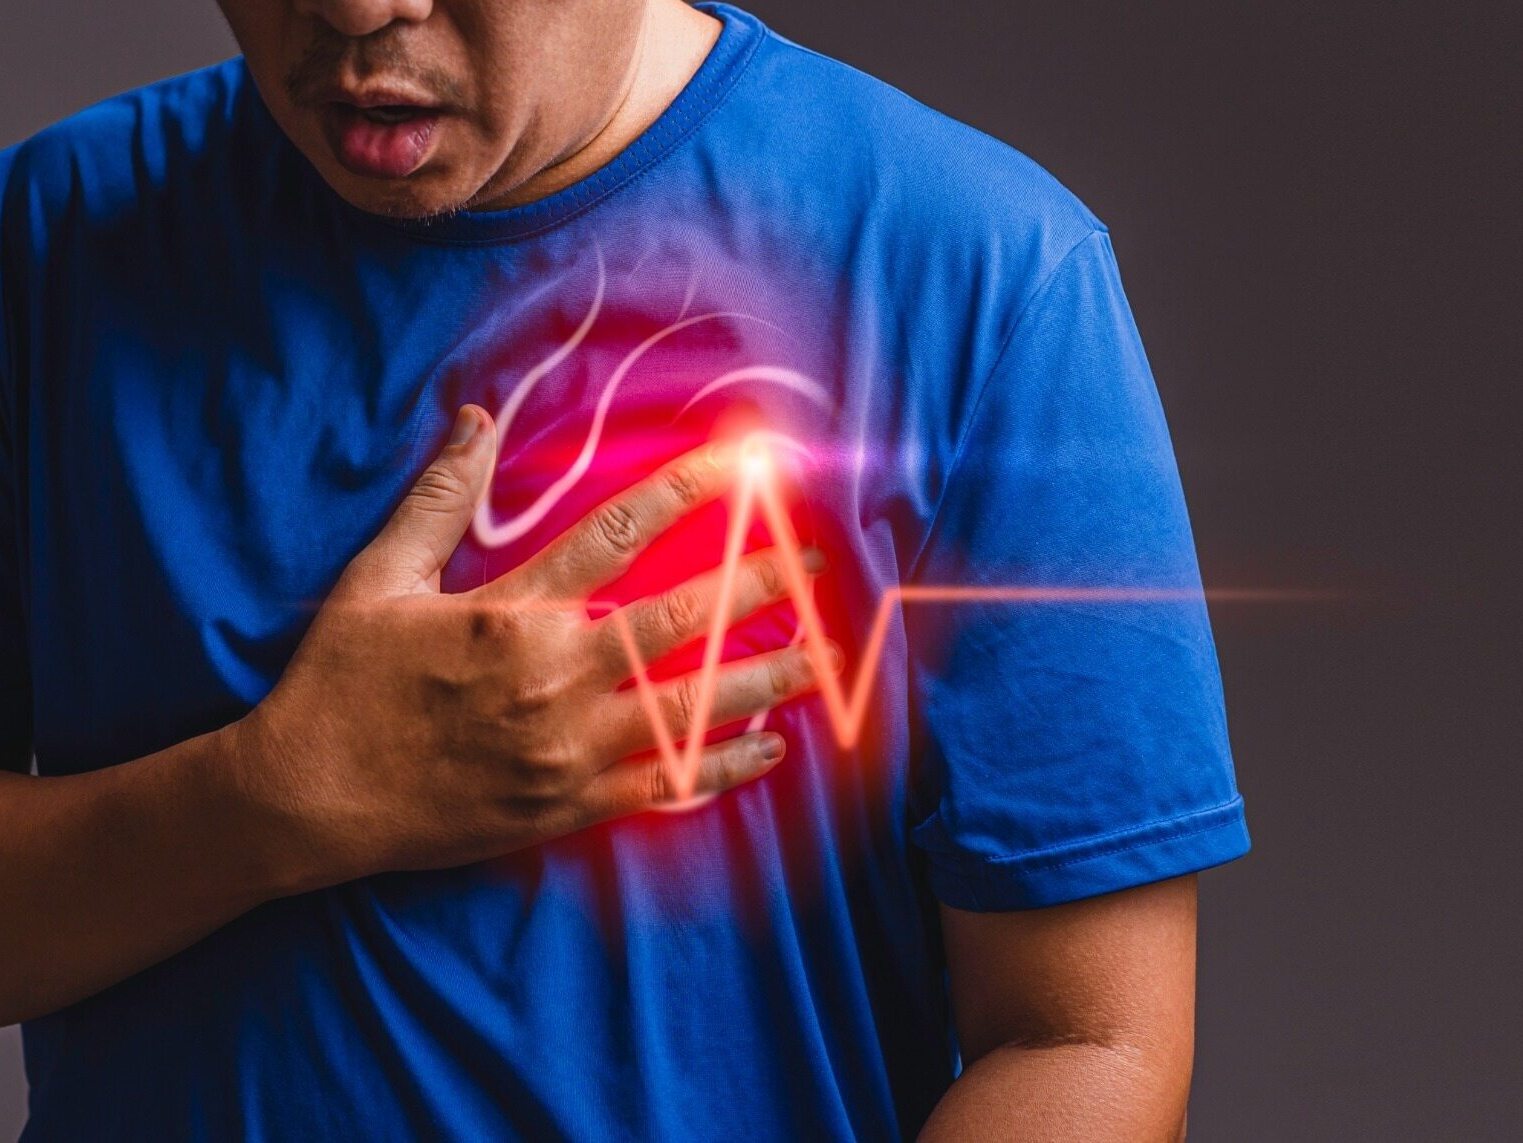 Every day in Poland, 90 people die from sudden cardiac arrest.  What are the symptoms?